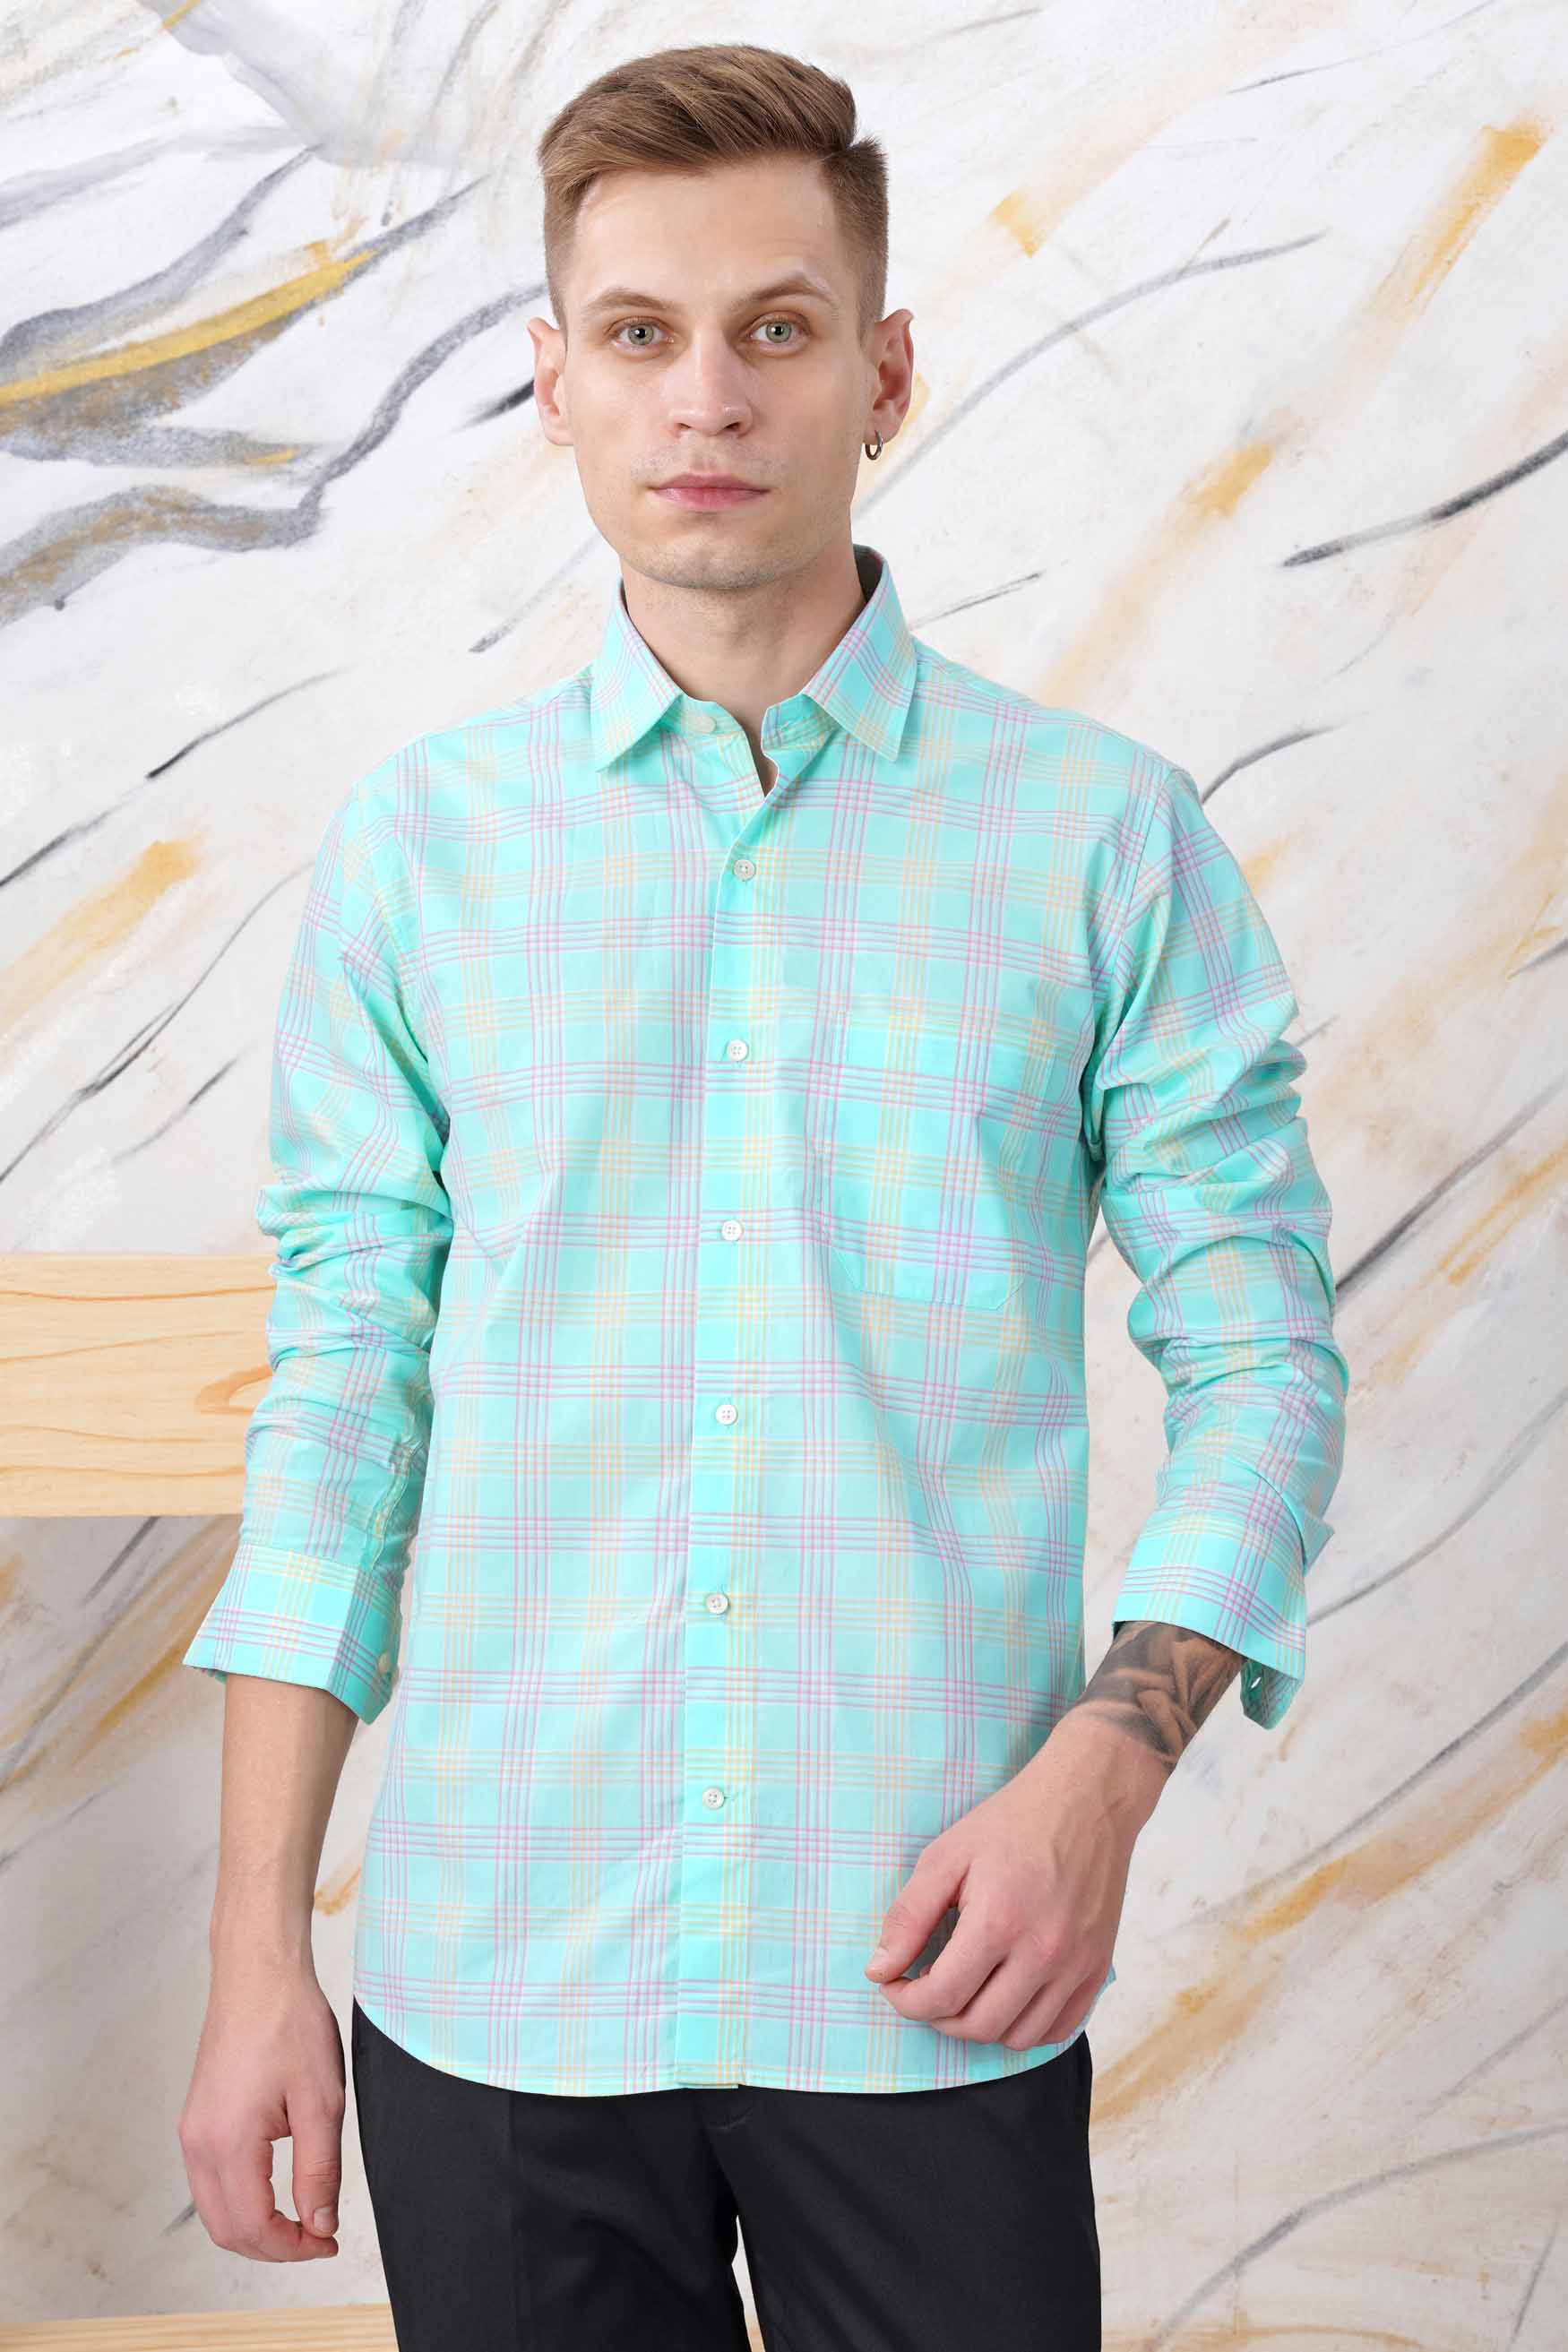 Blizzard Blue with Lilac Purple and Buff Yellow Checkered Premium Cotton Shirt 11592-38, 11592-H-38, 11592-39, 11592-H-39, 11592-40, 11592-H-40, 11592-42, 11592-H-42, 11592-44, 11592-H-44, 11592-46, 11592-H-46, 11592-48, 11592-H-48, 11592-50, 11592-H-50, 11592-52, 11592-H-52